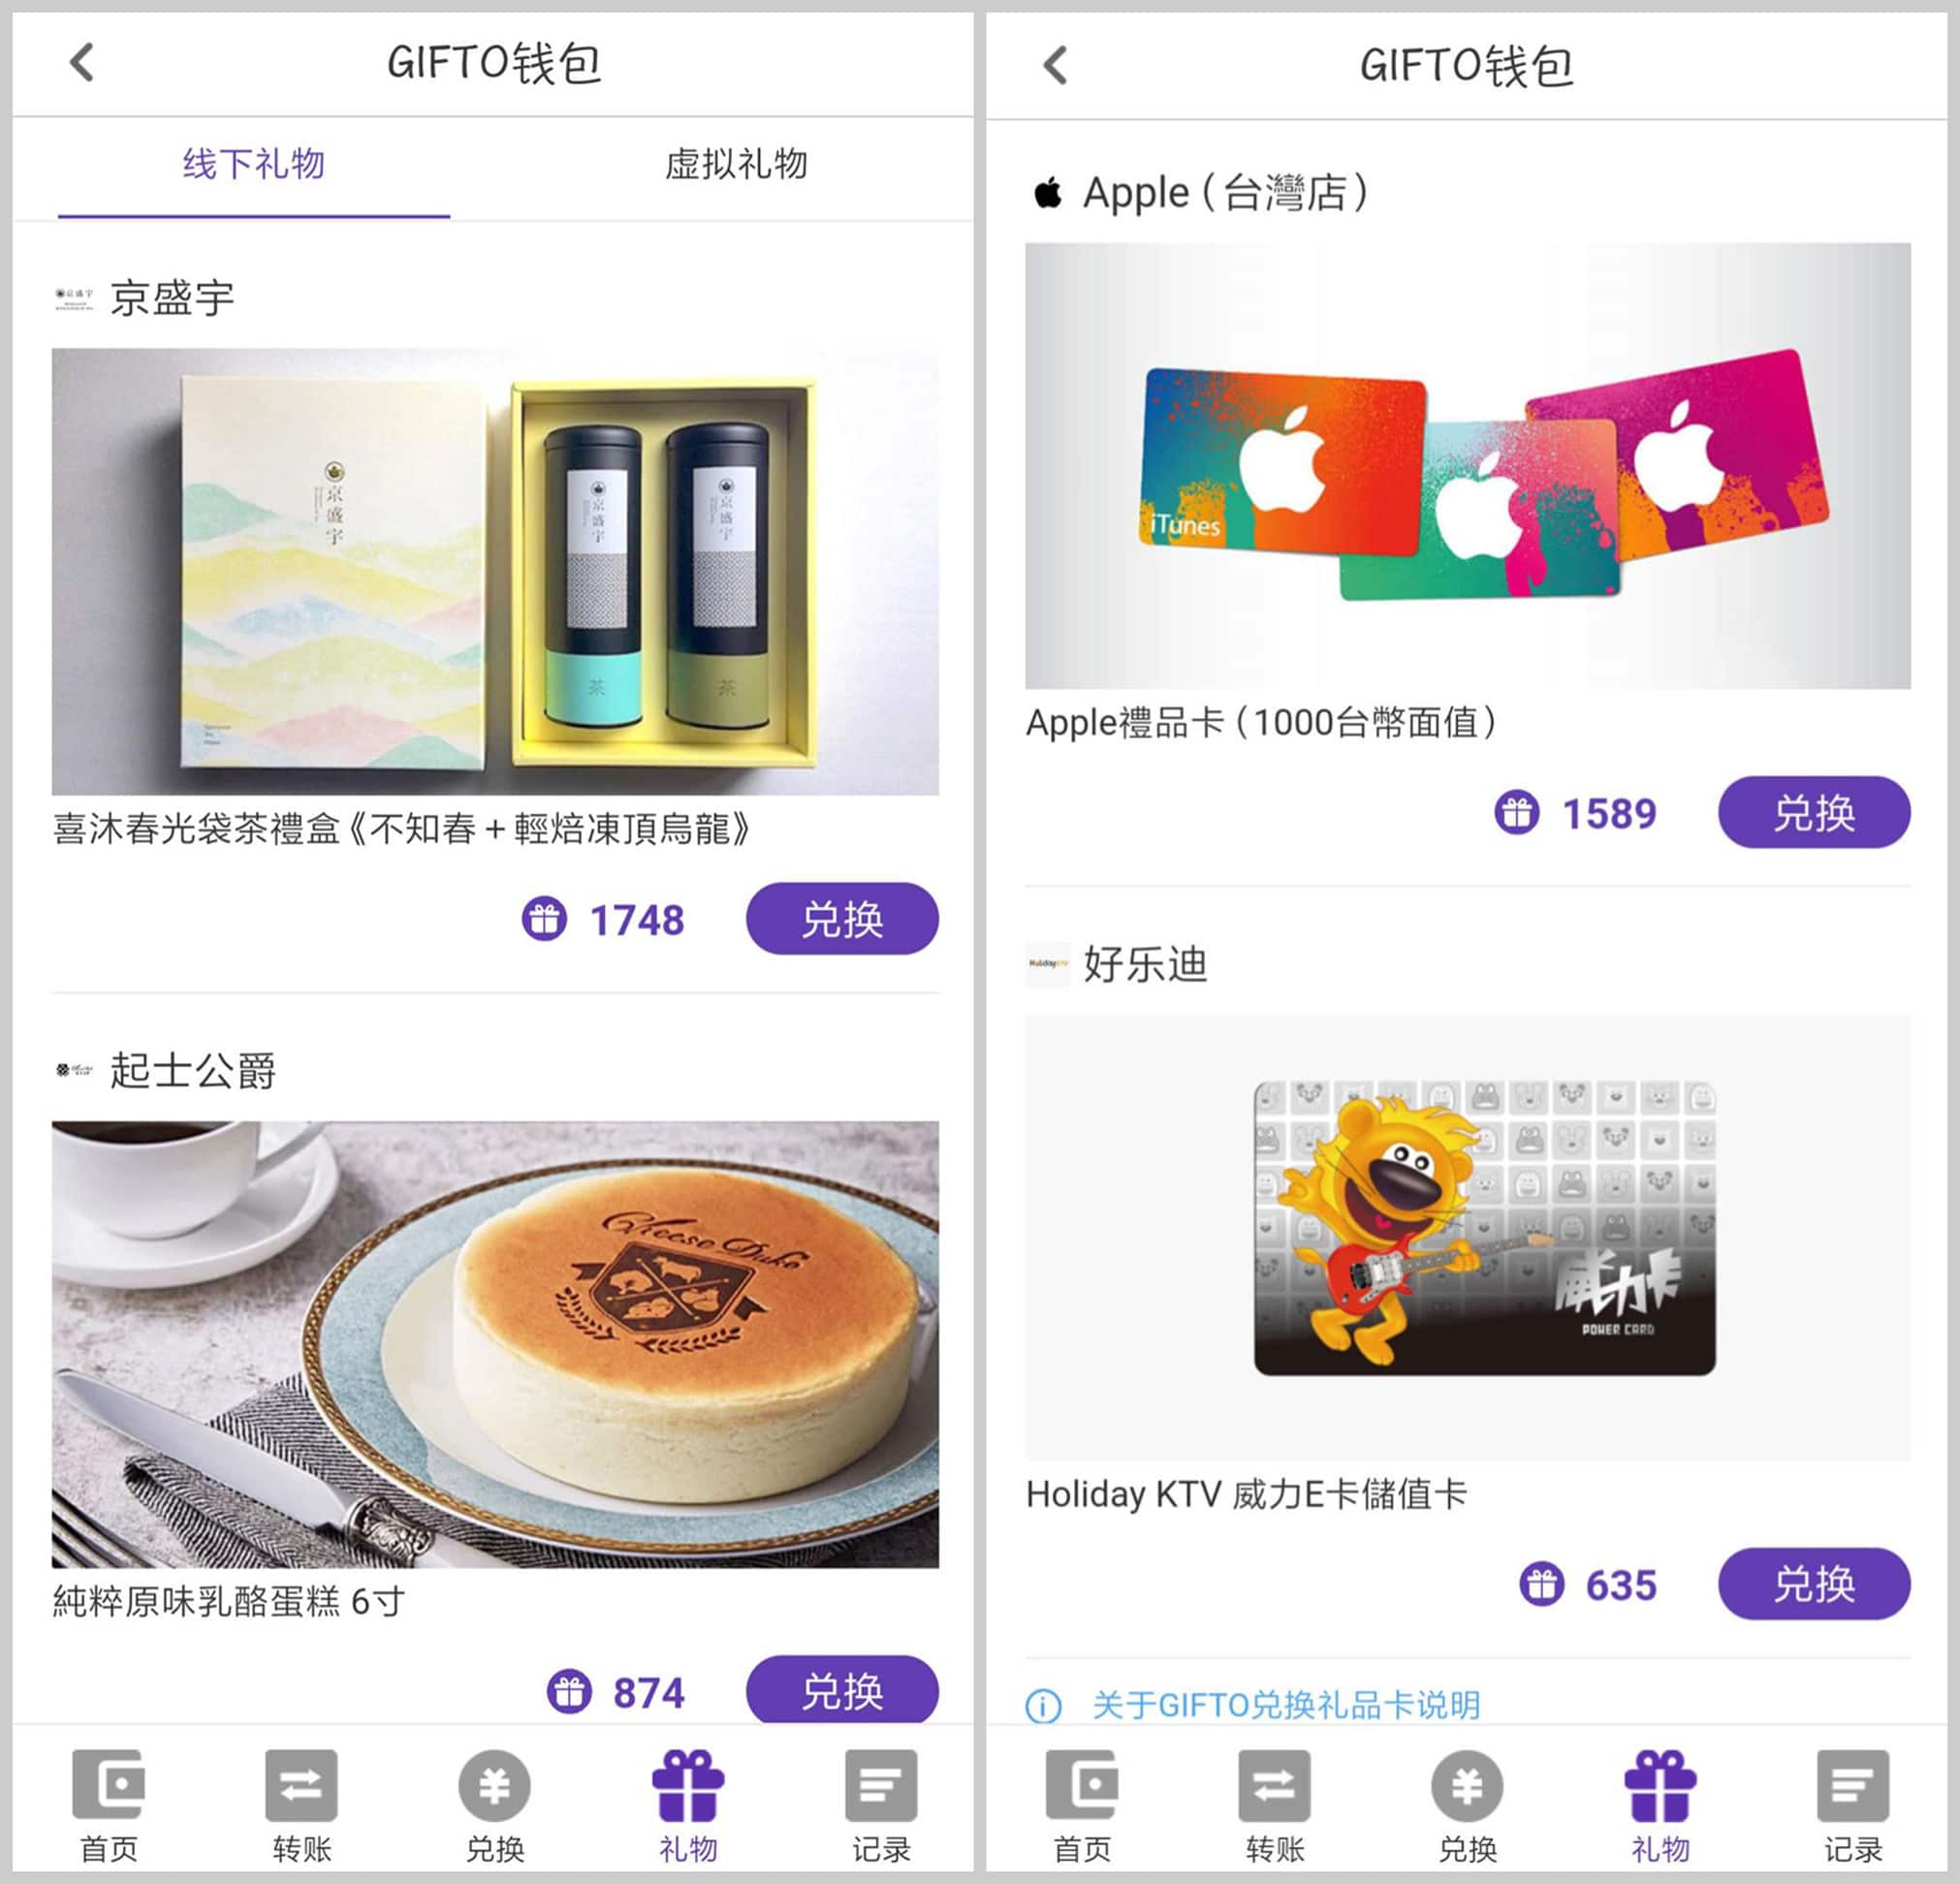  gifto taiwan cryptocurrency action platform live new 